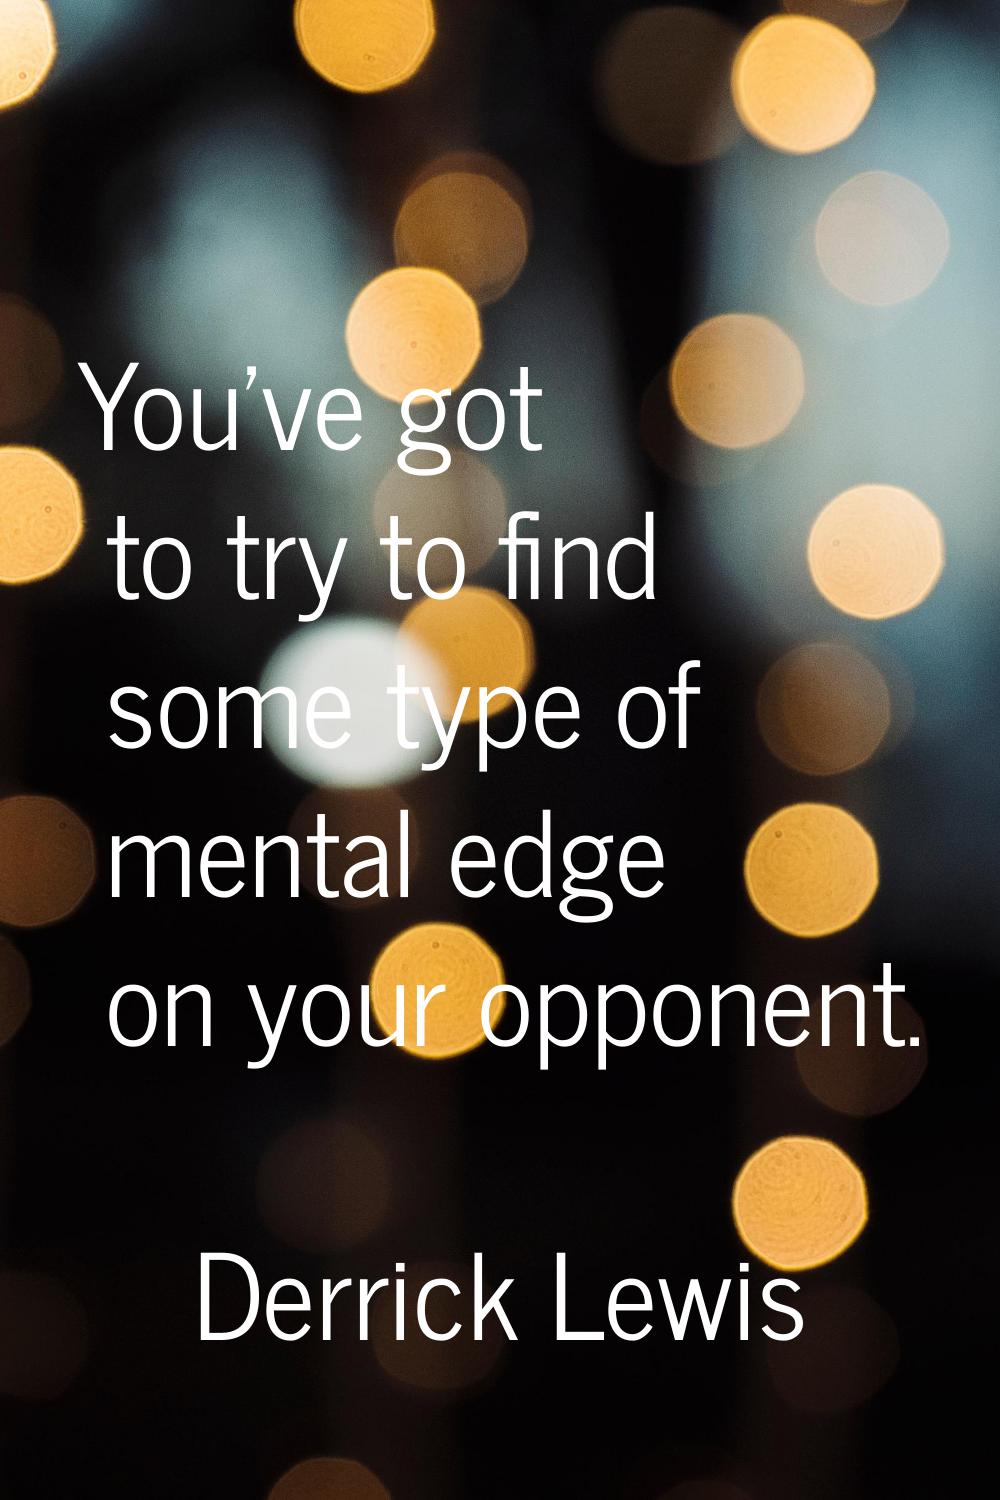 You've got to try to find some type of mental edge on your opponent.